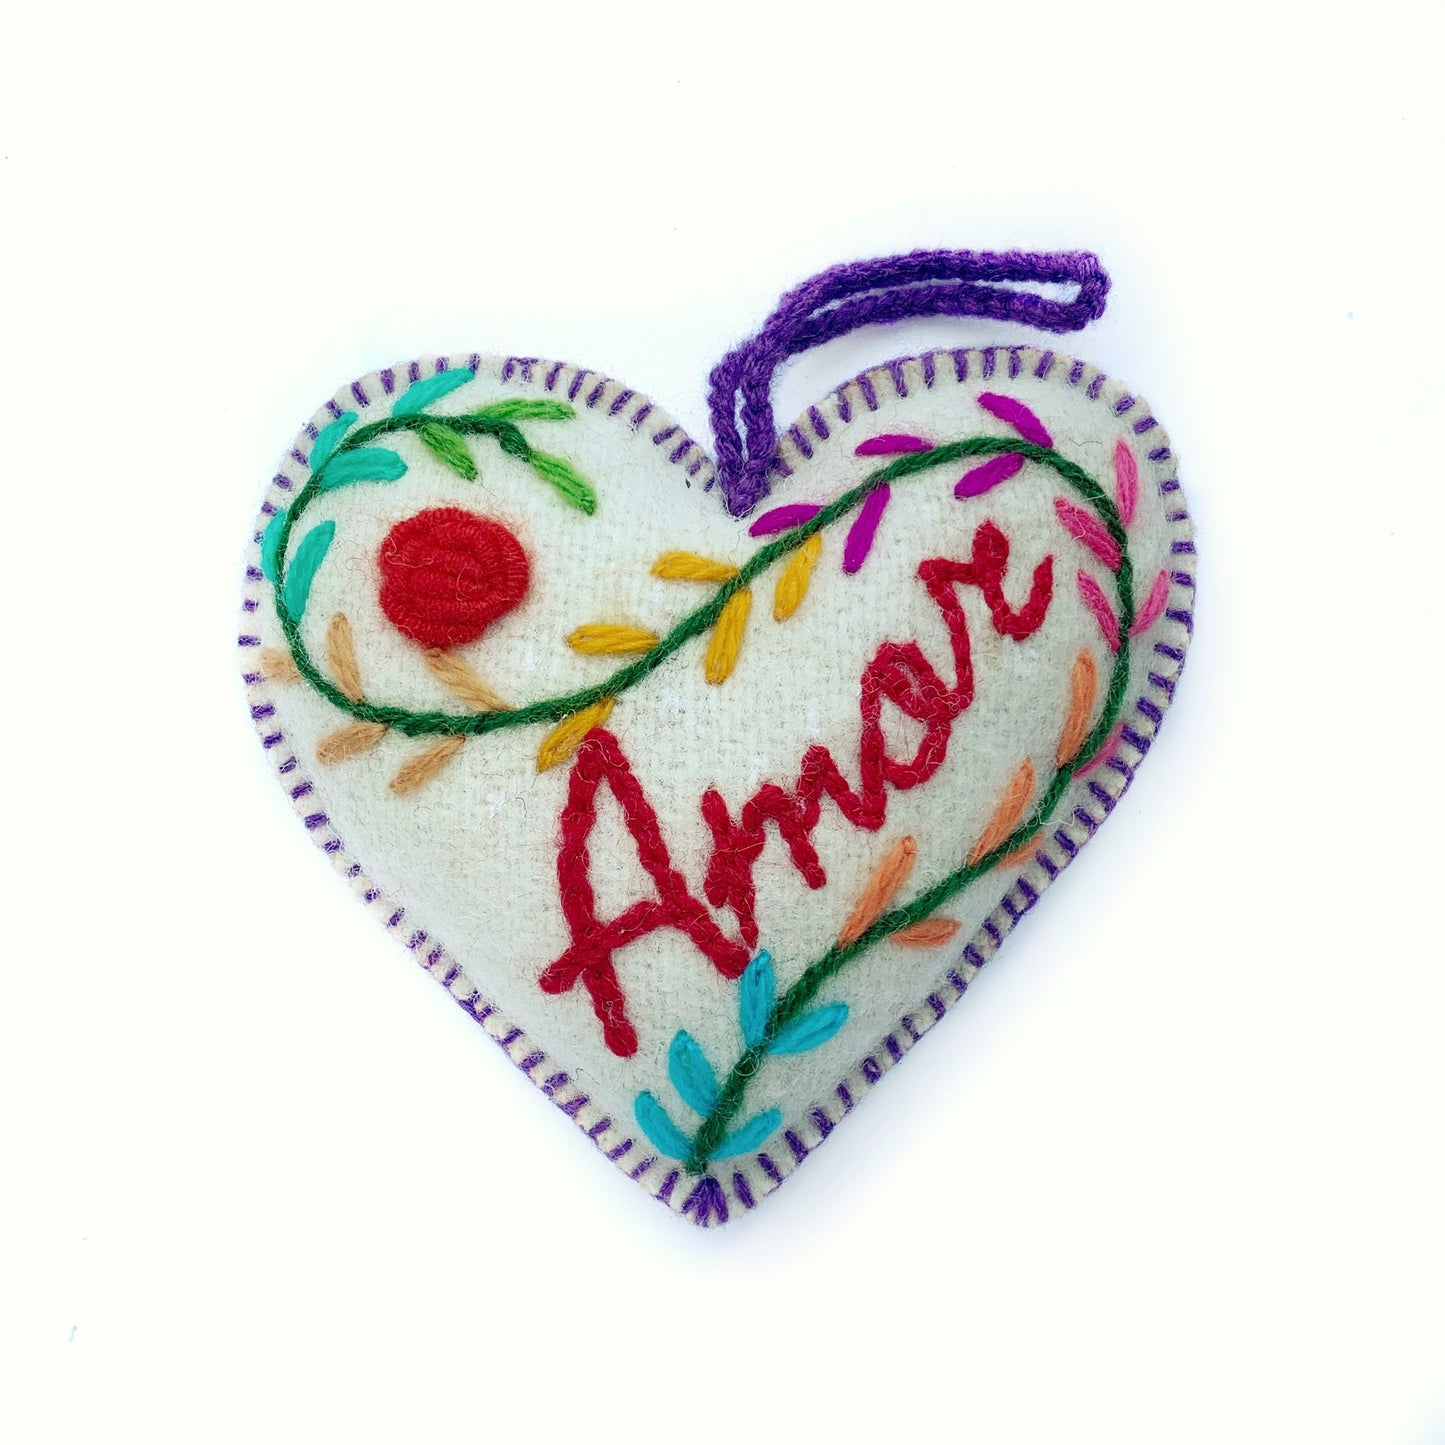 Embroidered Wool Heart Ornament